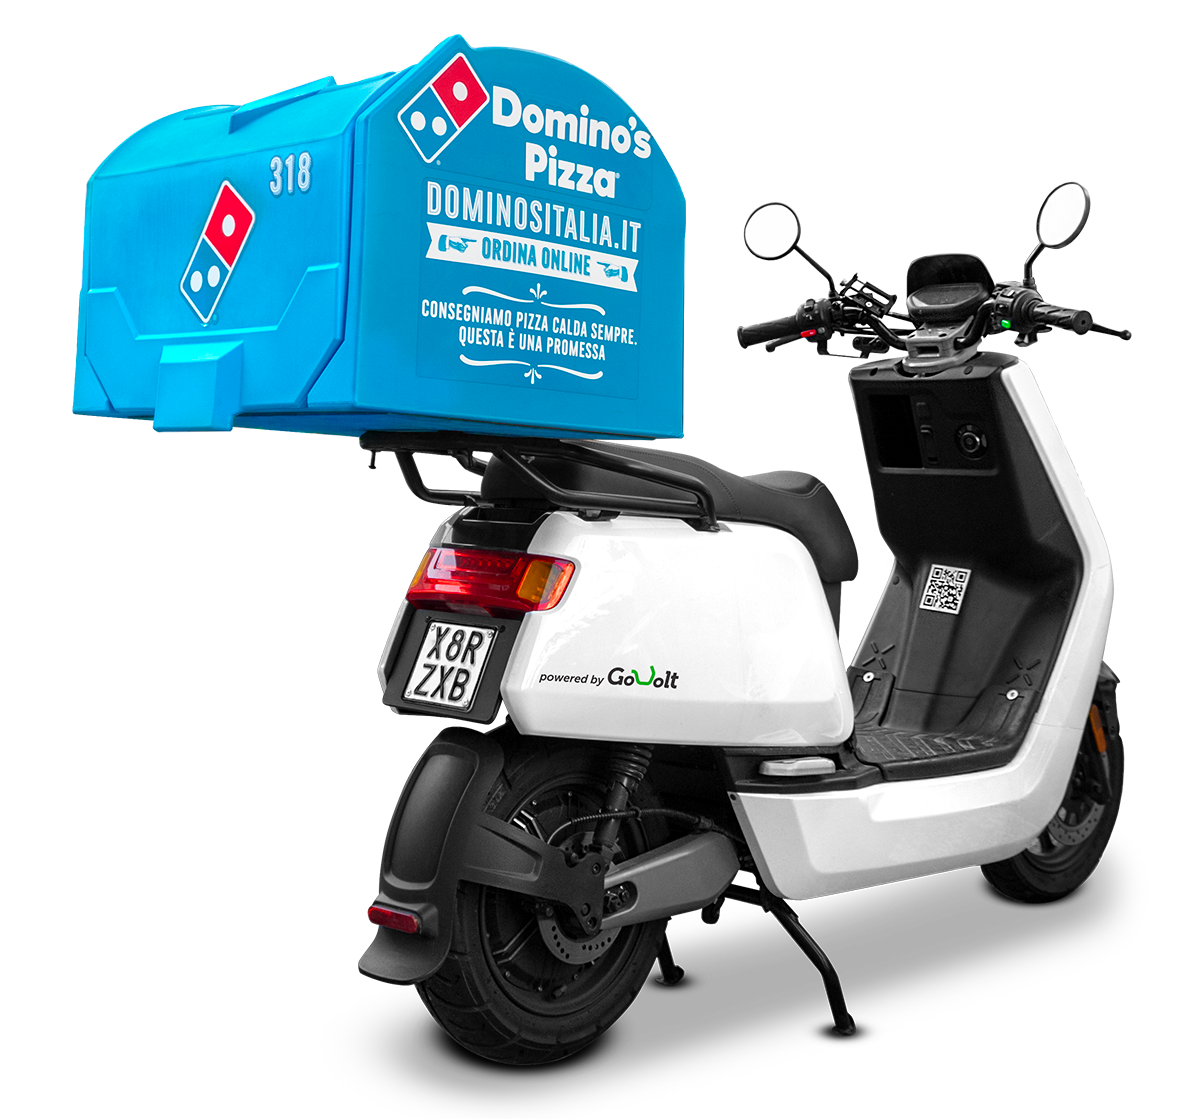 Delivery, but with style!